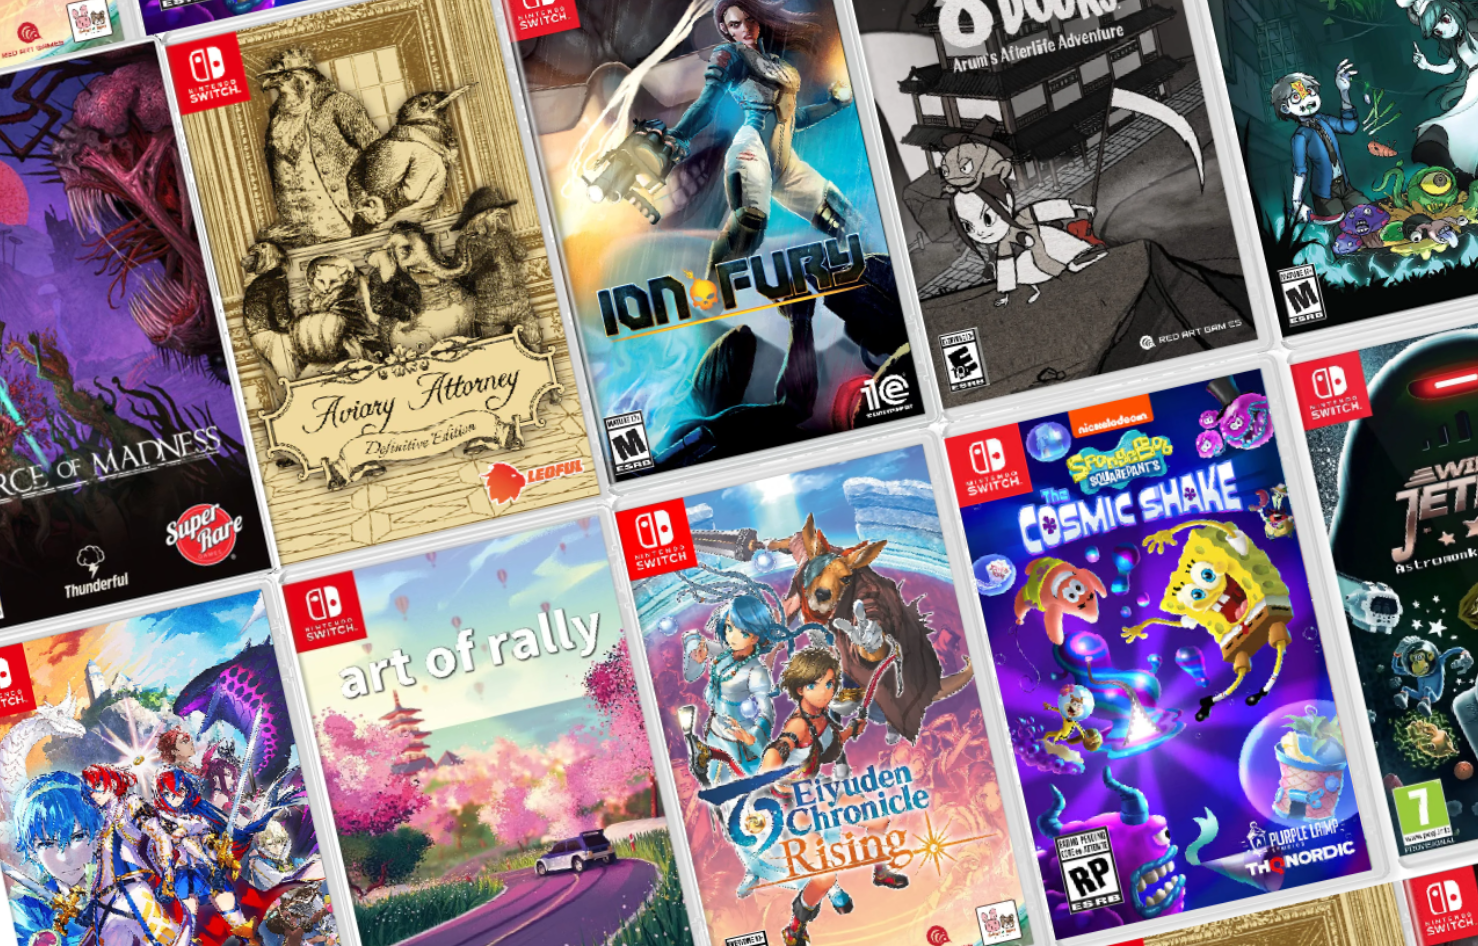 The best Nintendo Switch games to buy in 2023